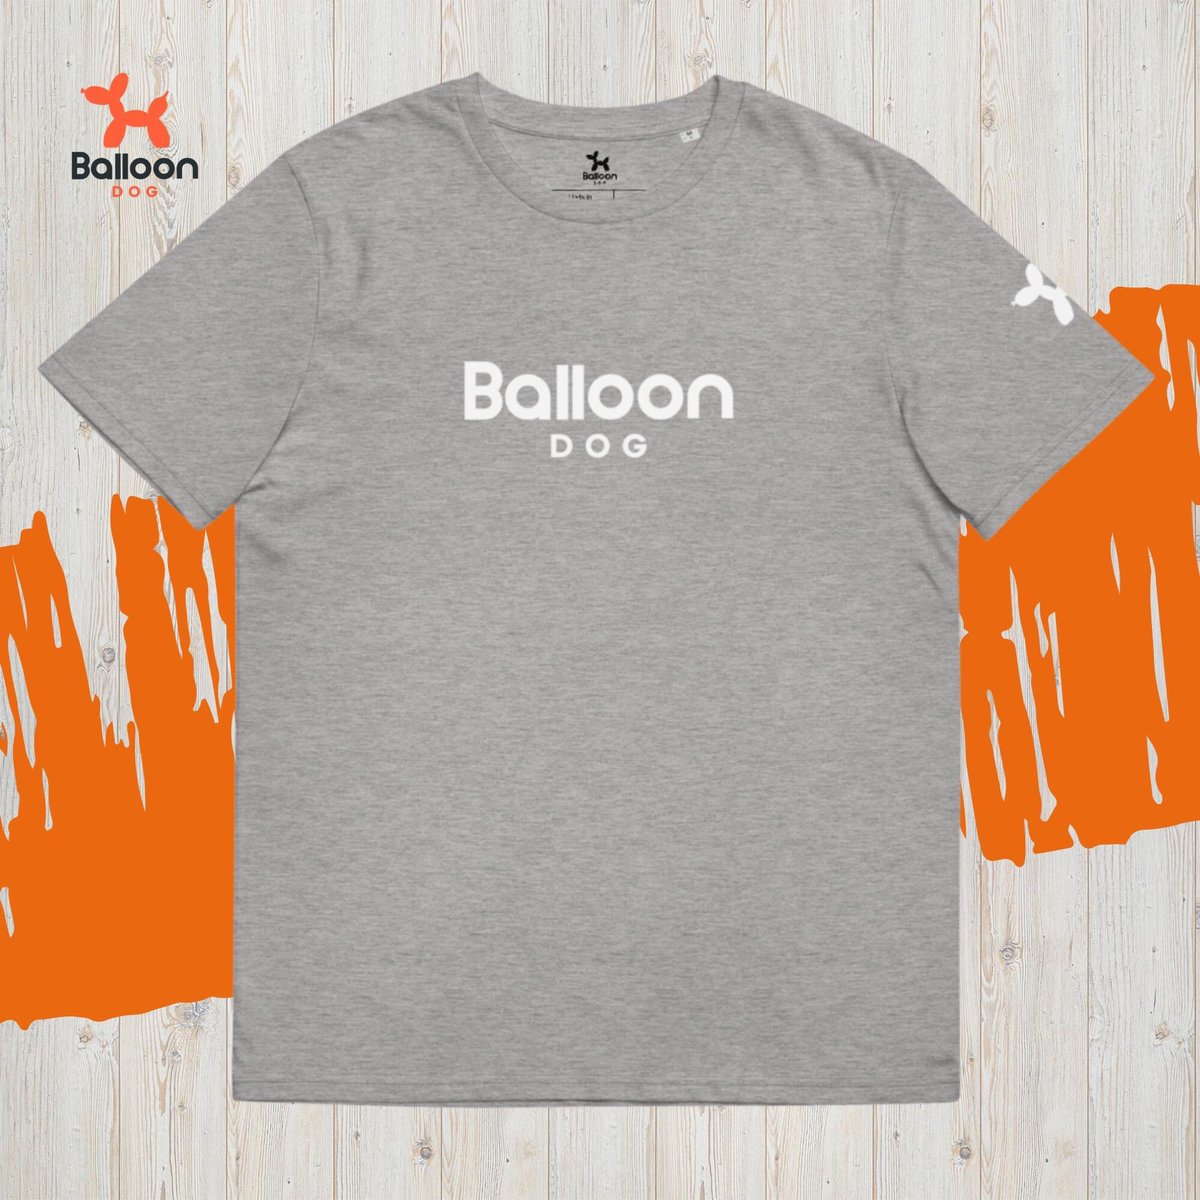 There's so many reasons to love our T-shirts. Organic Cotton, Vegan Approved, Made to Order and they look amazing too! 

#weareballoondog #balloondog #shopping #mensfashion #vegan #organic #veganclothing #organicclothing #sustainablefashion